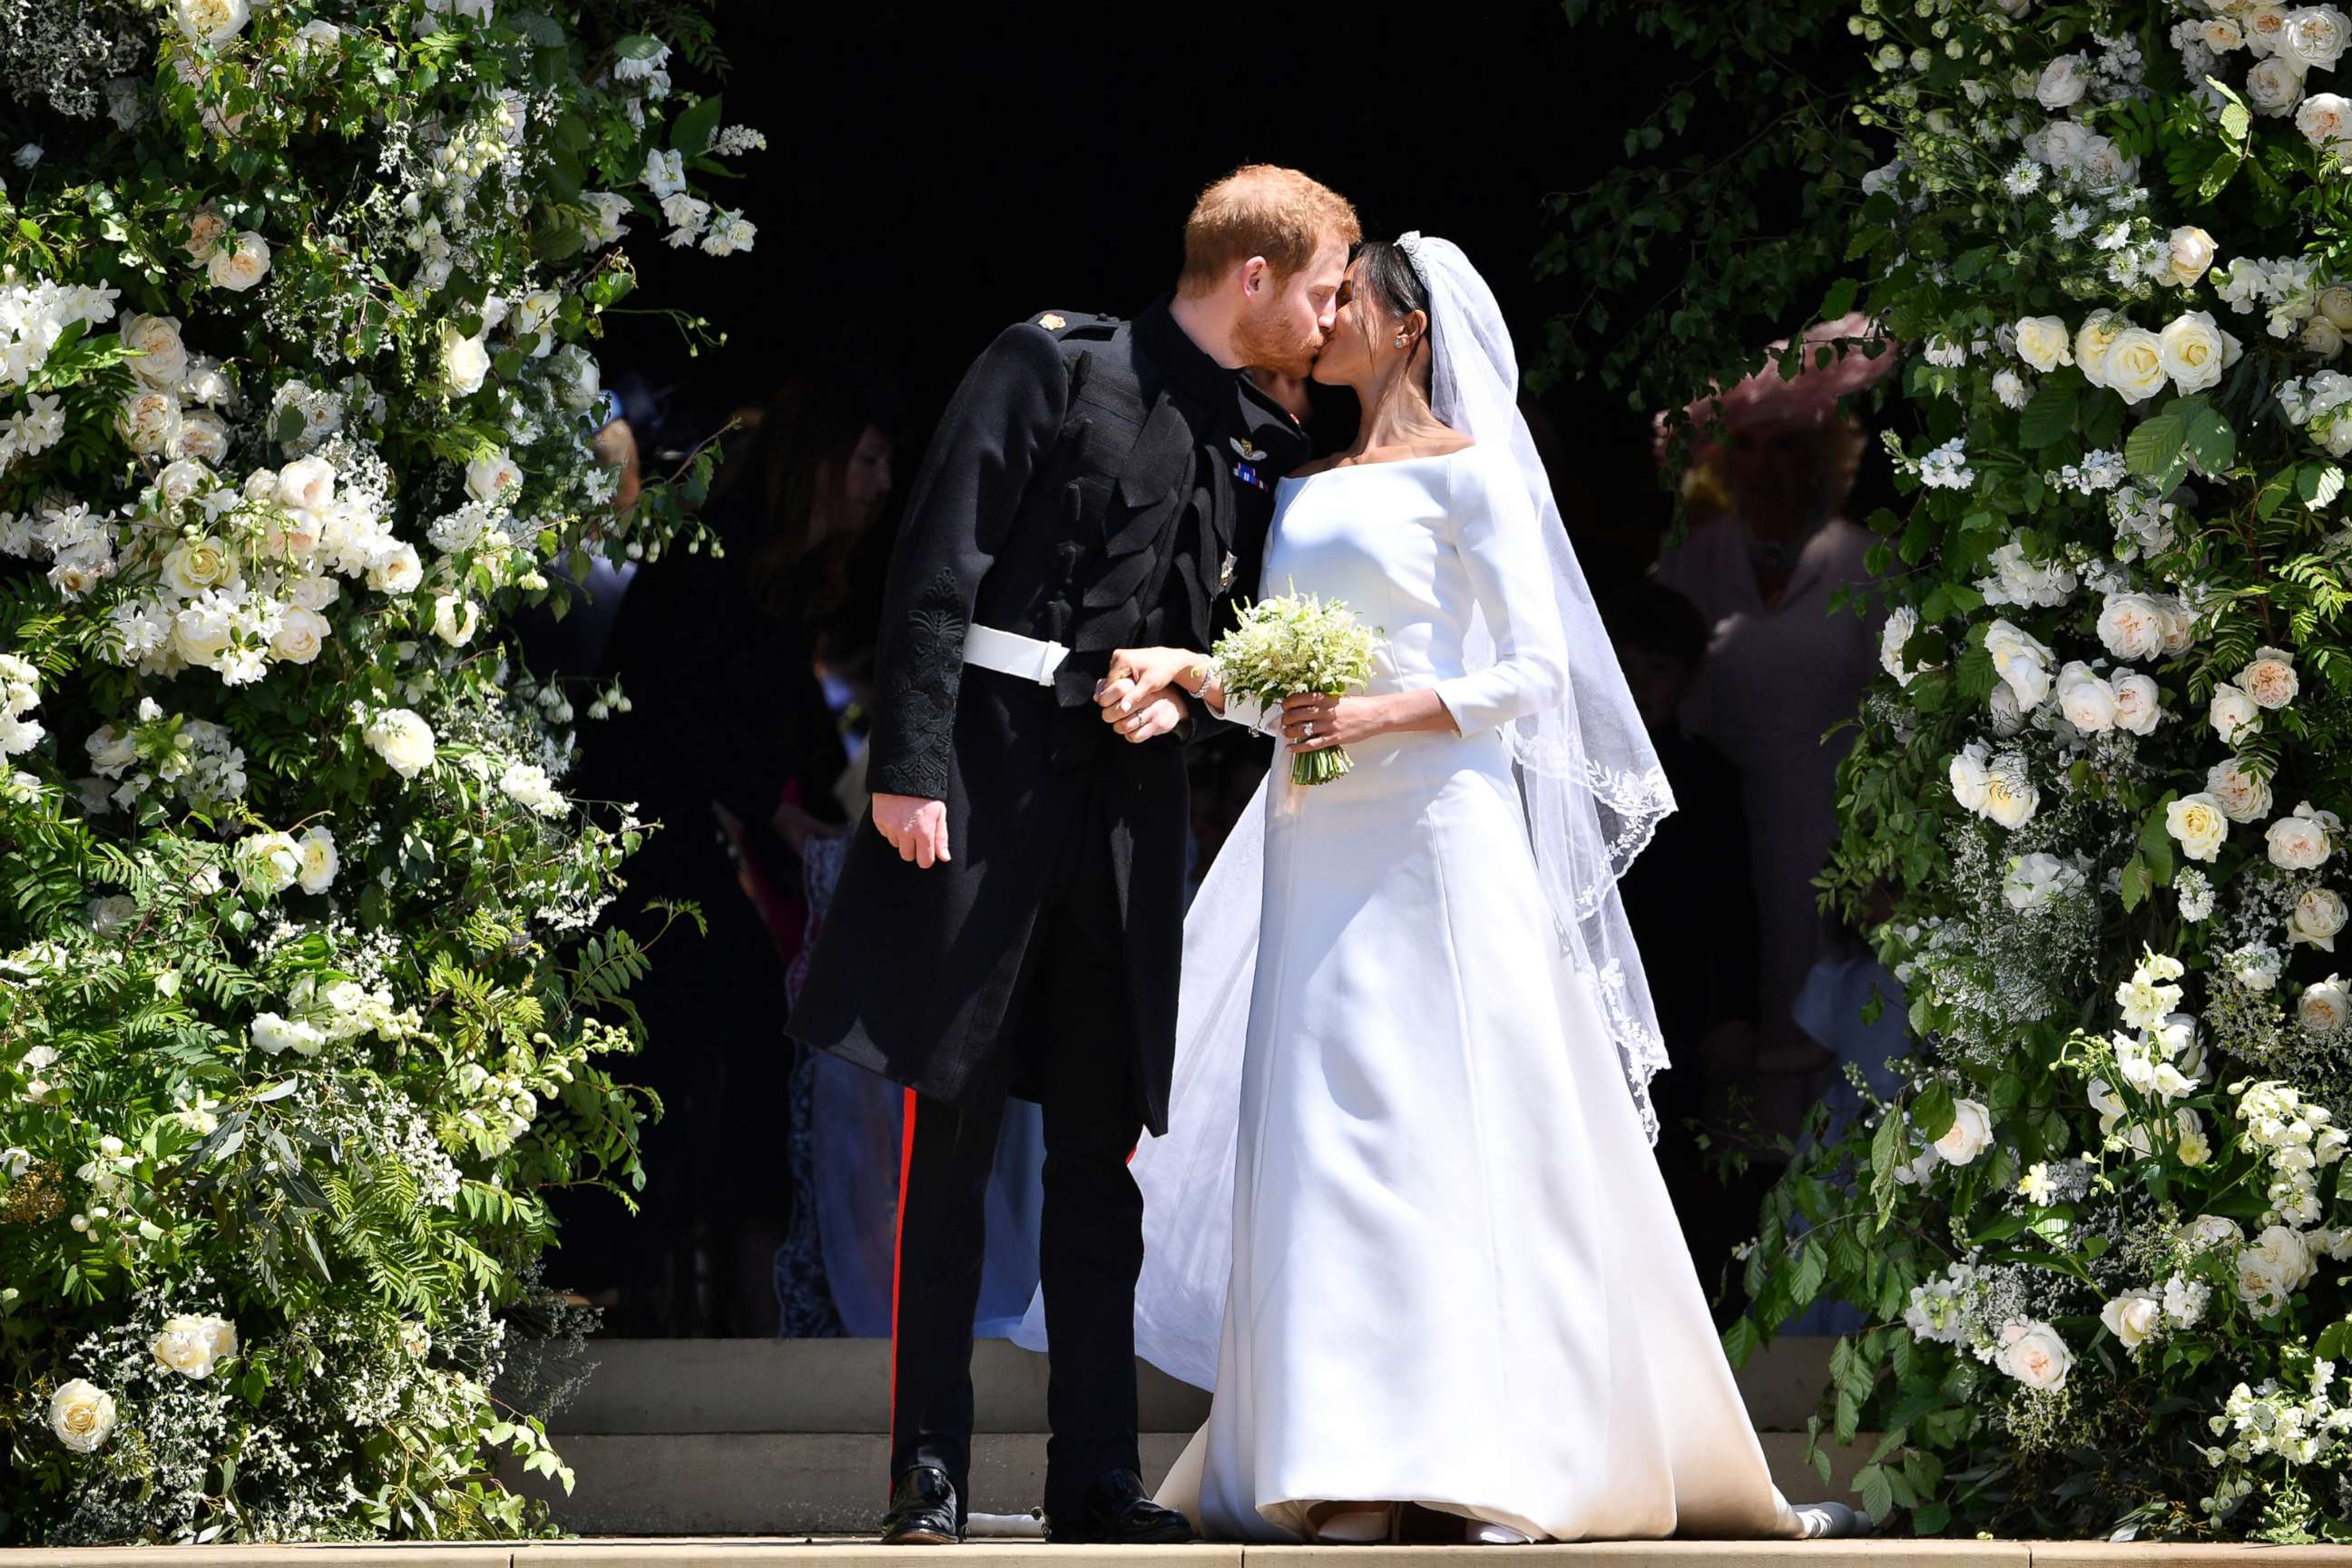 PHOTO: Britain's Prince Harry, Duke of Sussex kisses his wife Meghan, Duchess of Sussex as they leave from the West Door of St George's Chapel, Windsor Castle on May 19, 2018, in Windsor England.